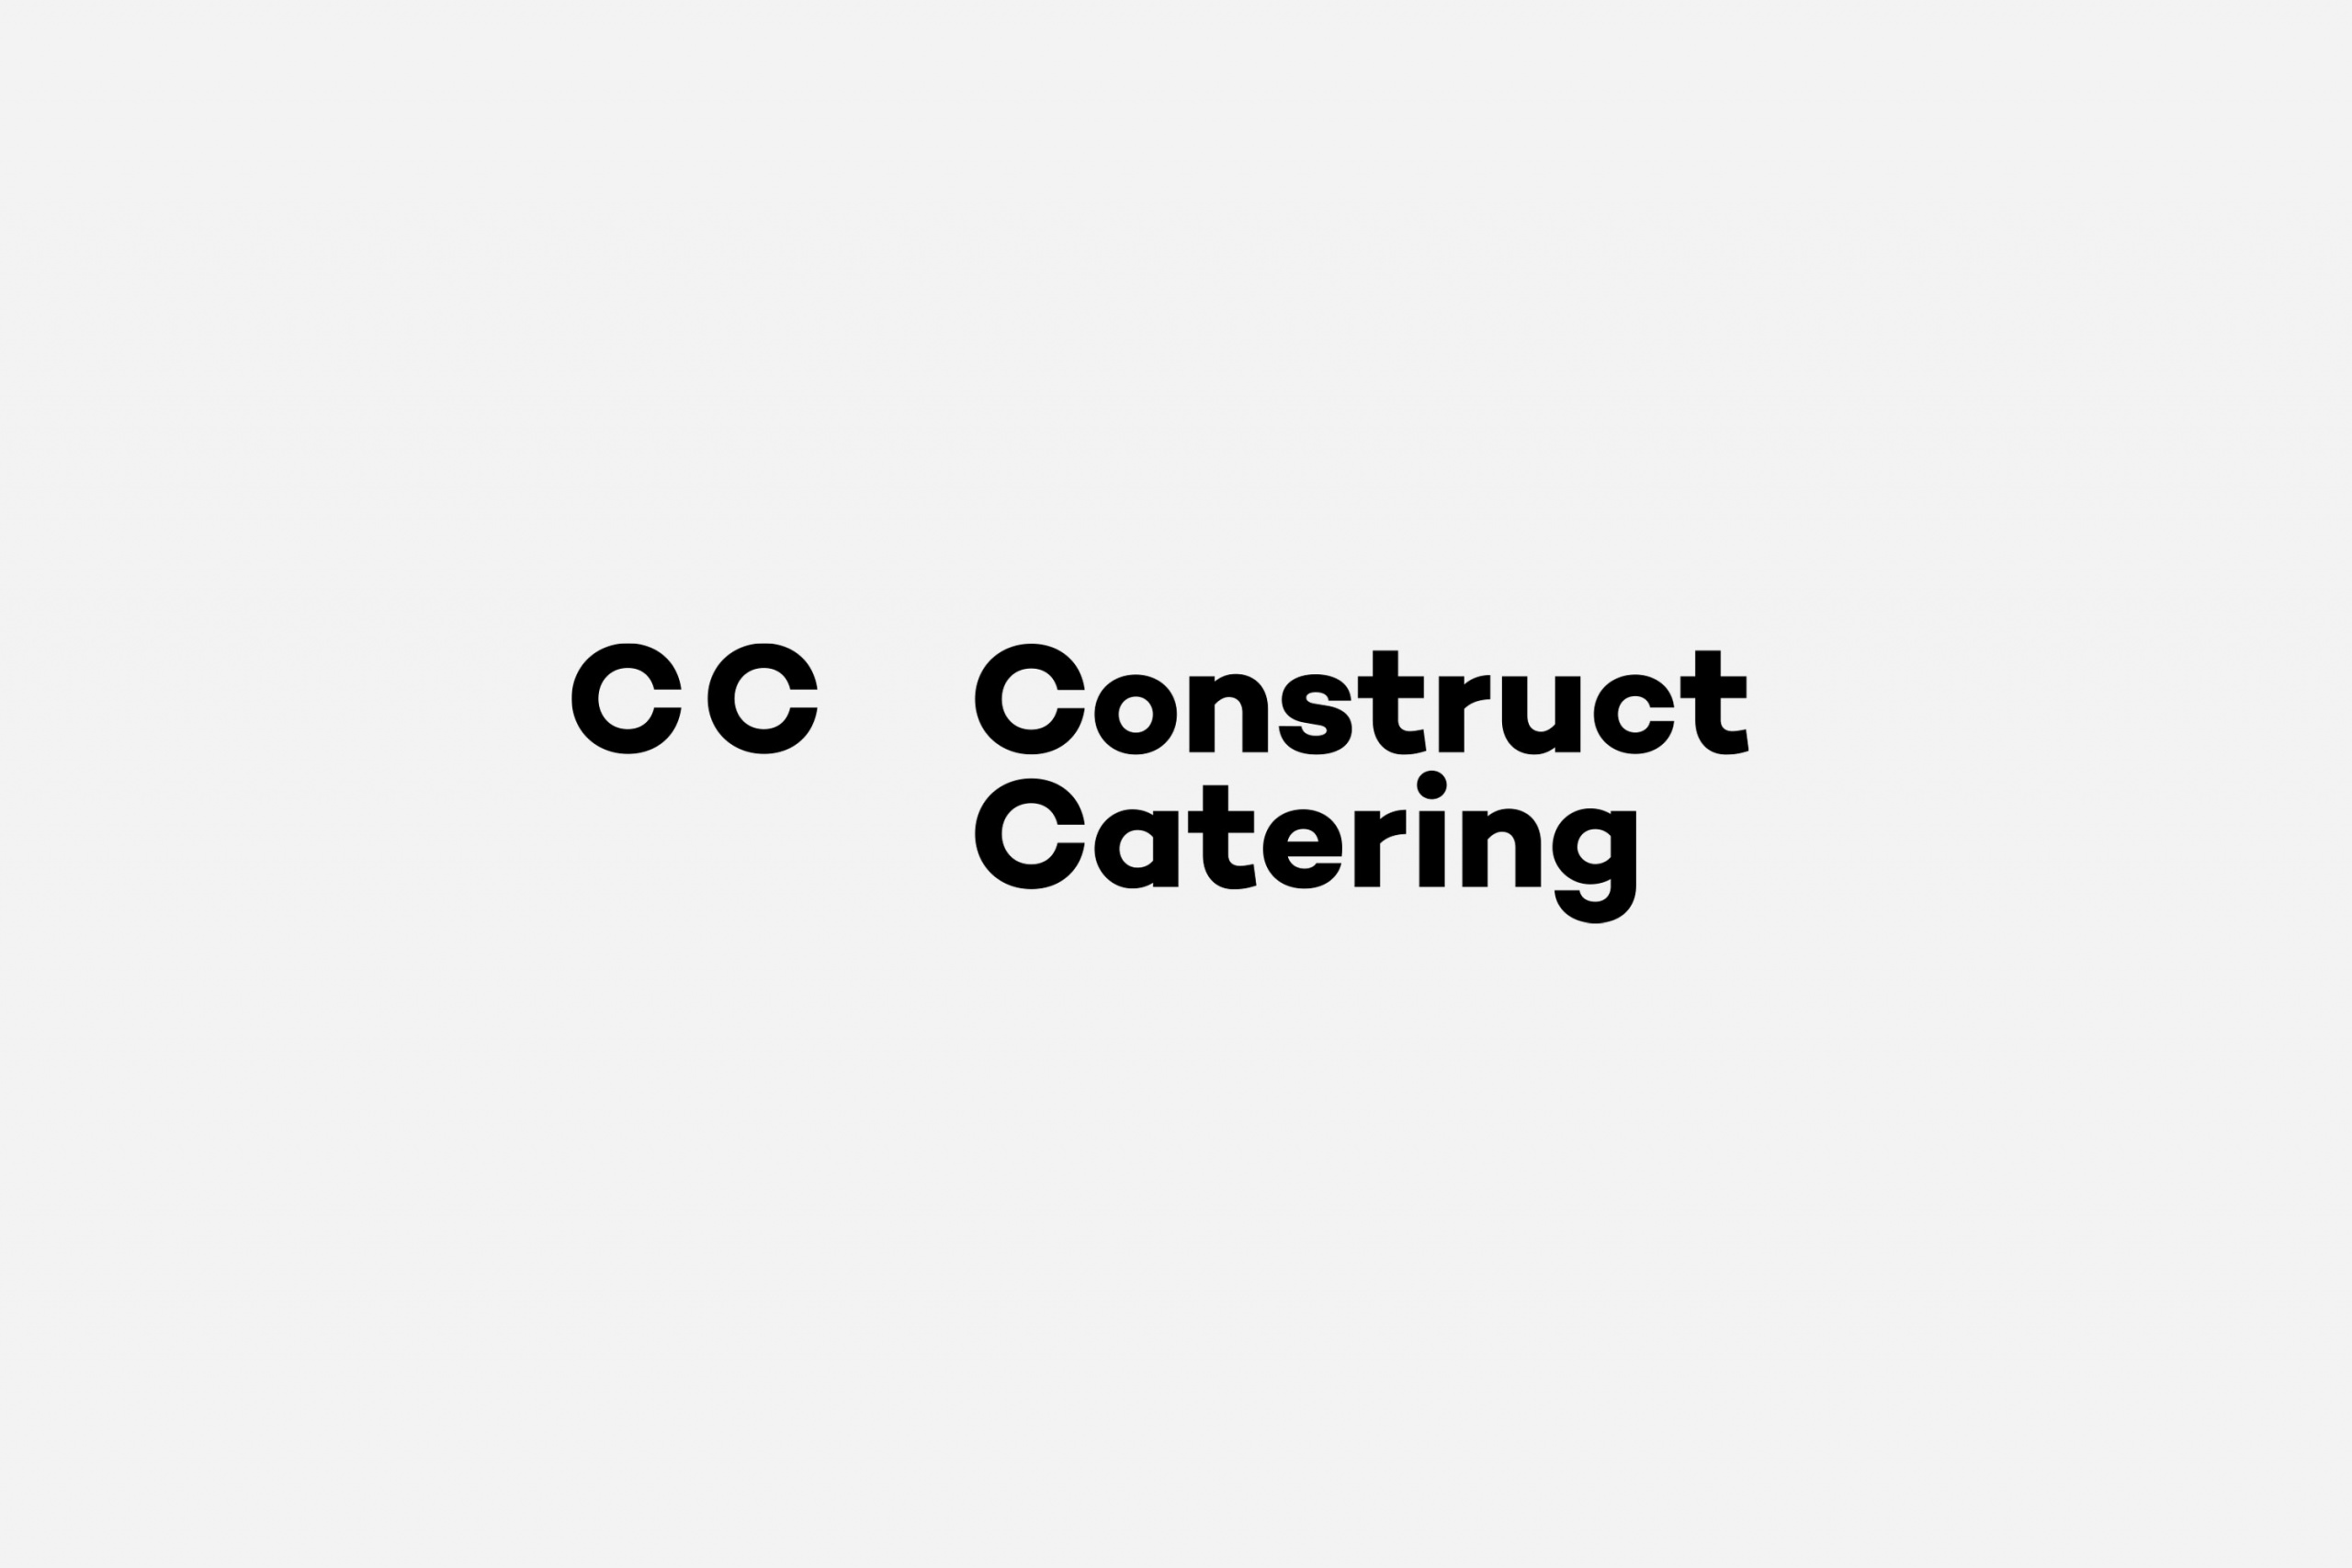 Construct Catering